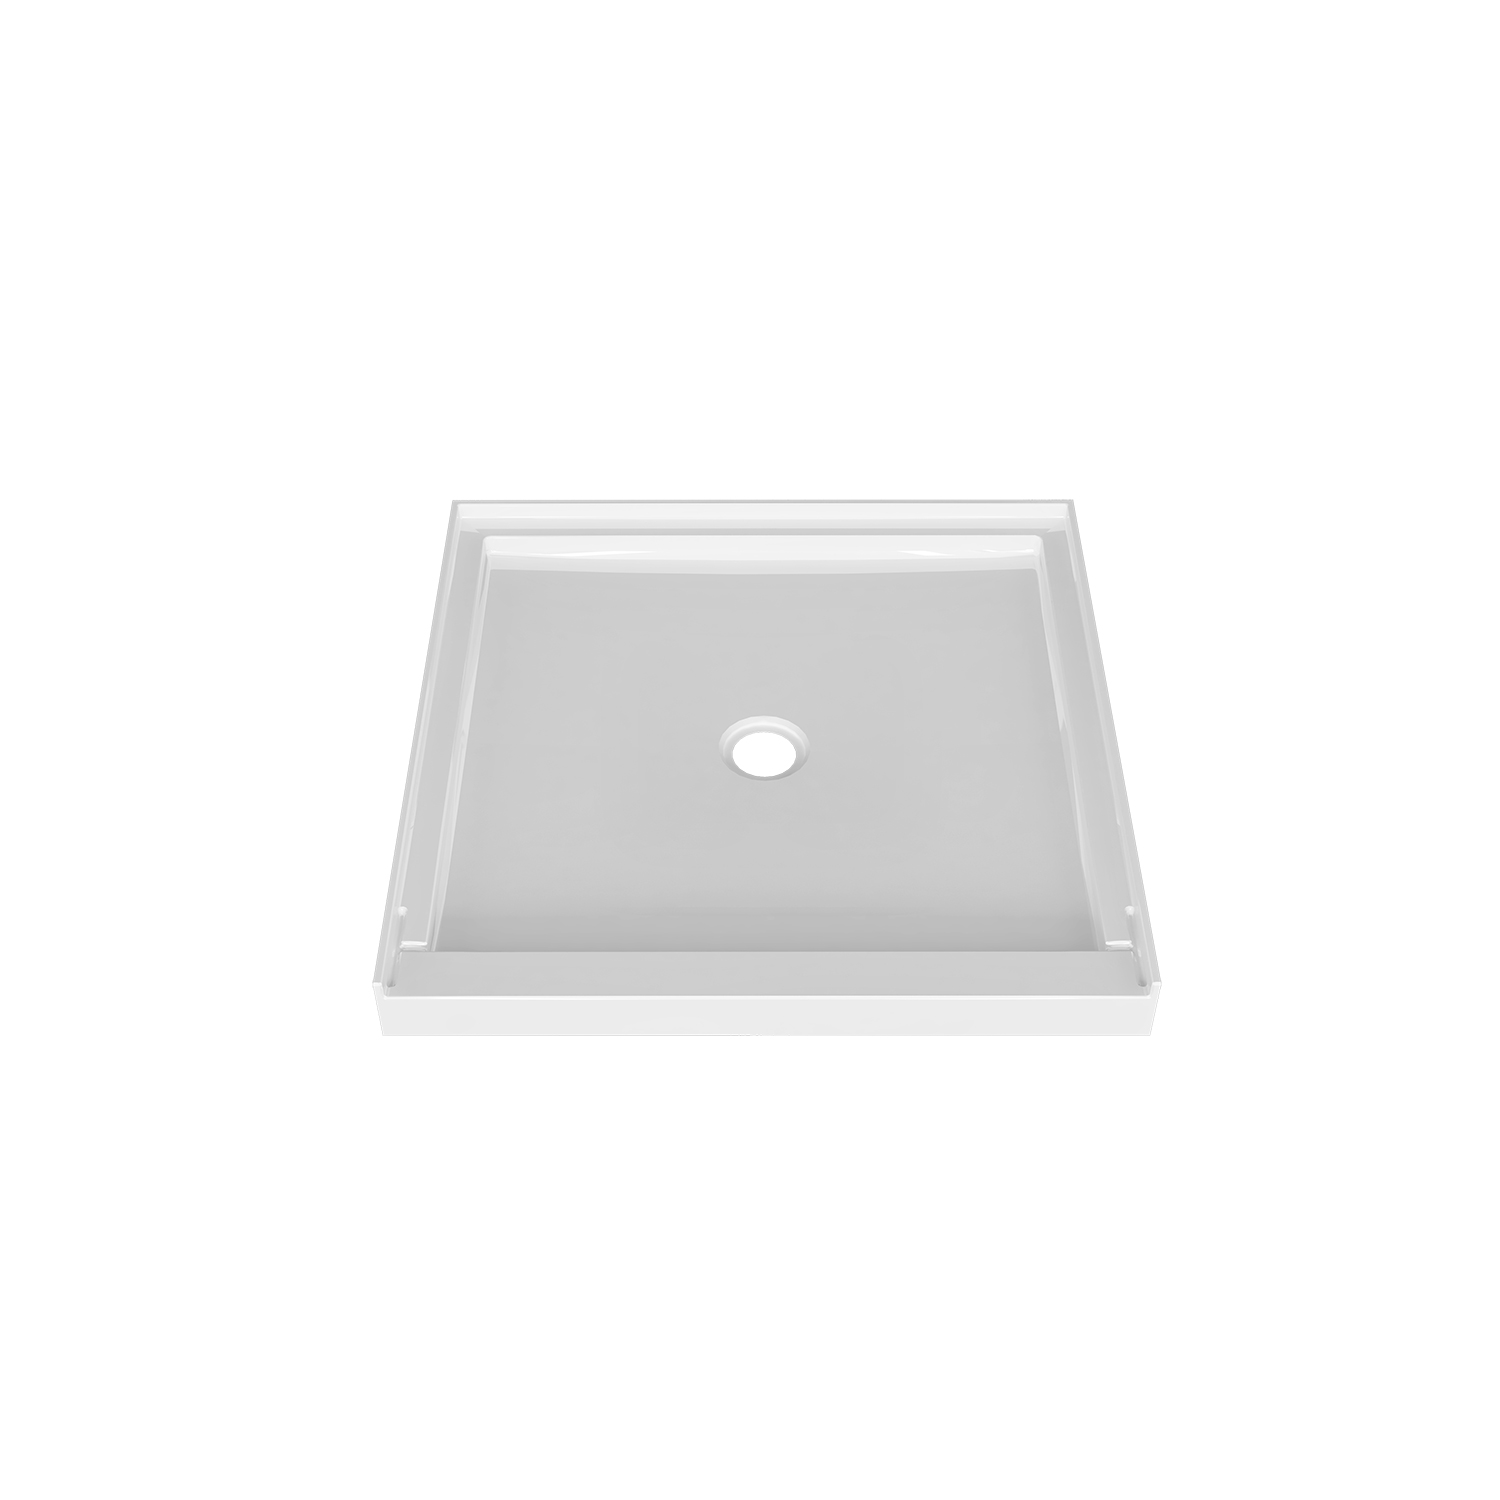 Shower base 36 x 36, in alcove, in glossy white